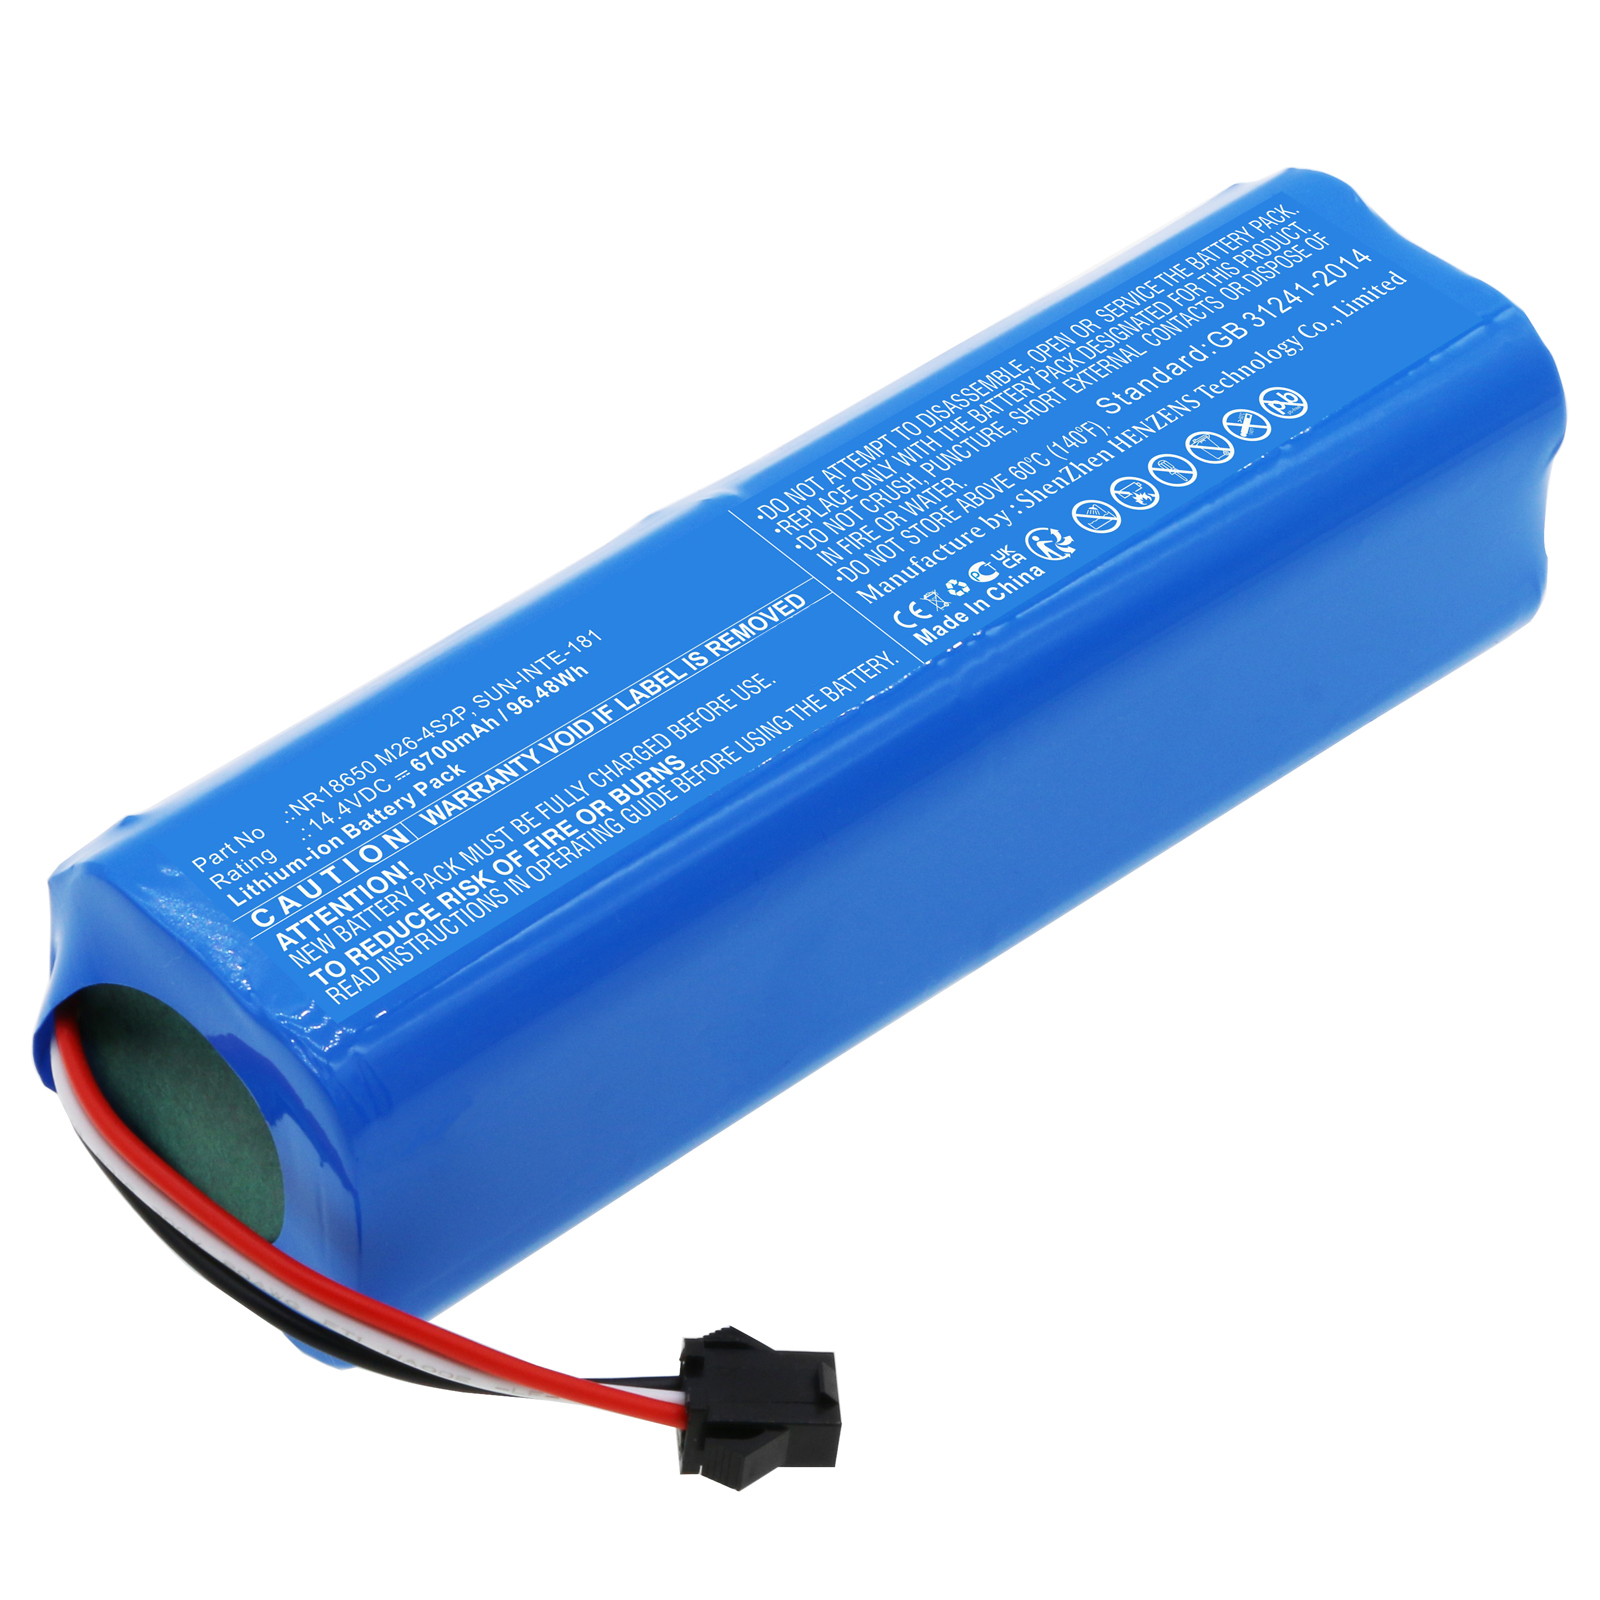 Batteries for RoidmiVacuum Cleaner